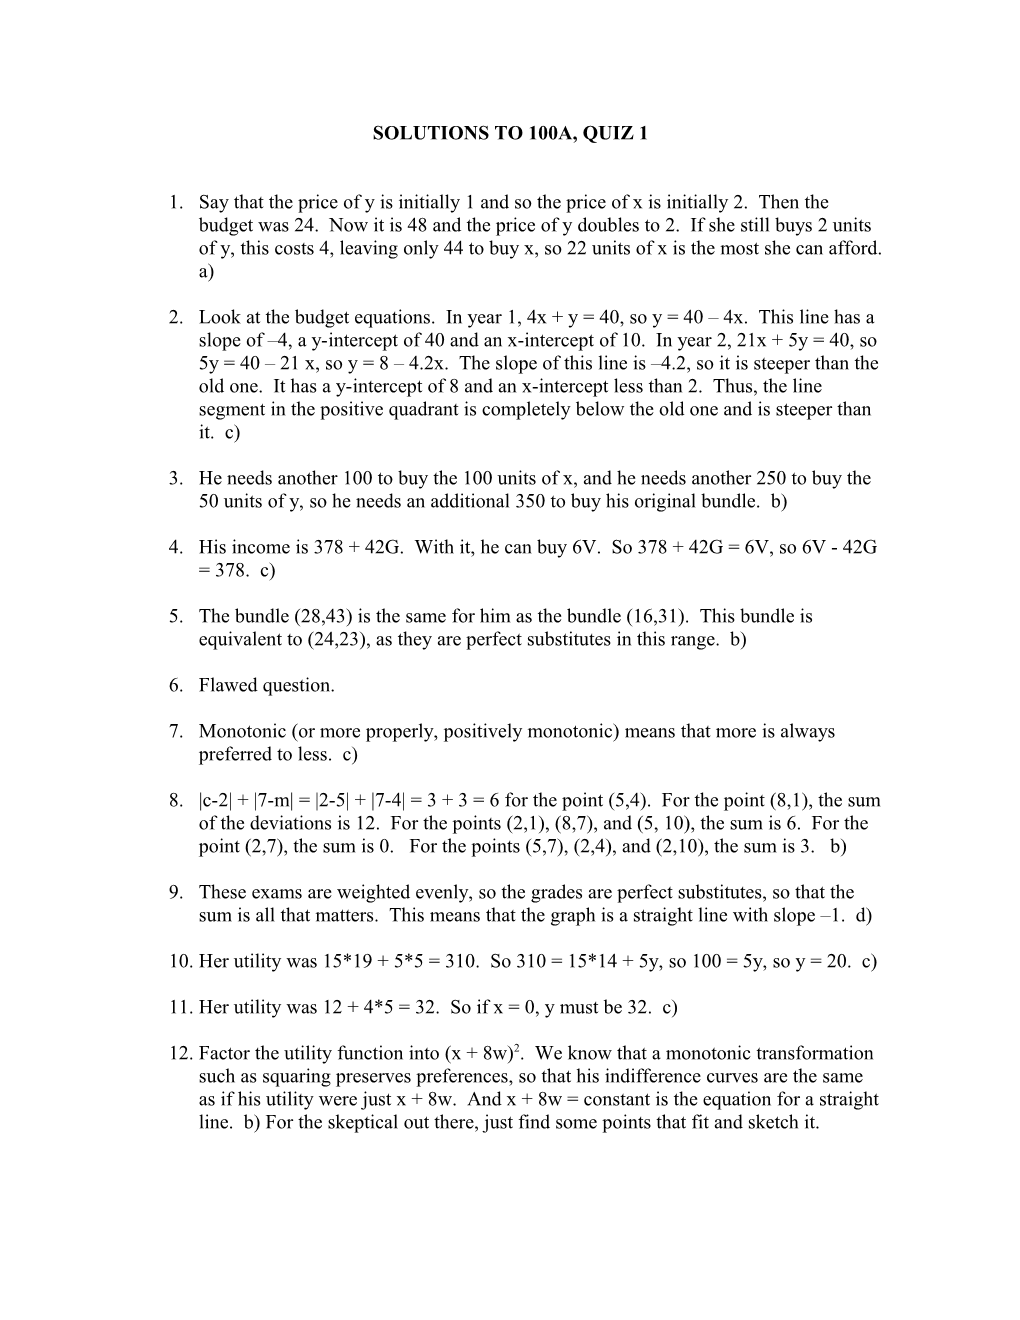 Solutions to 100A, Quiz 3